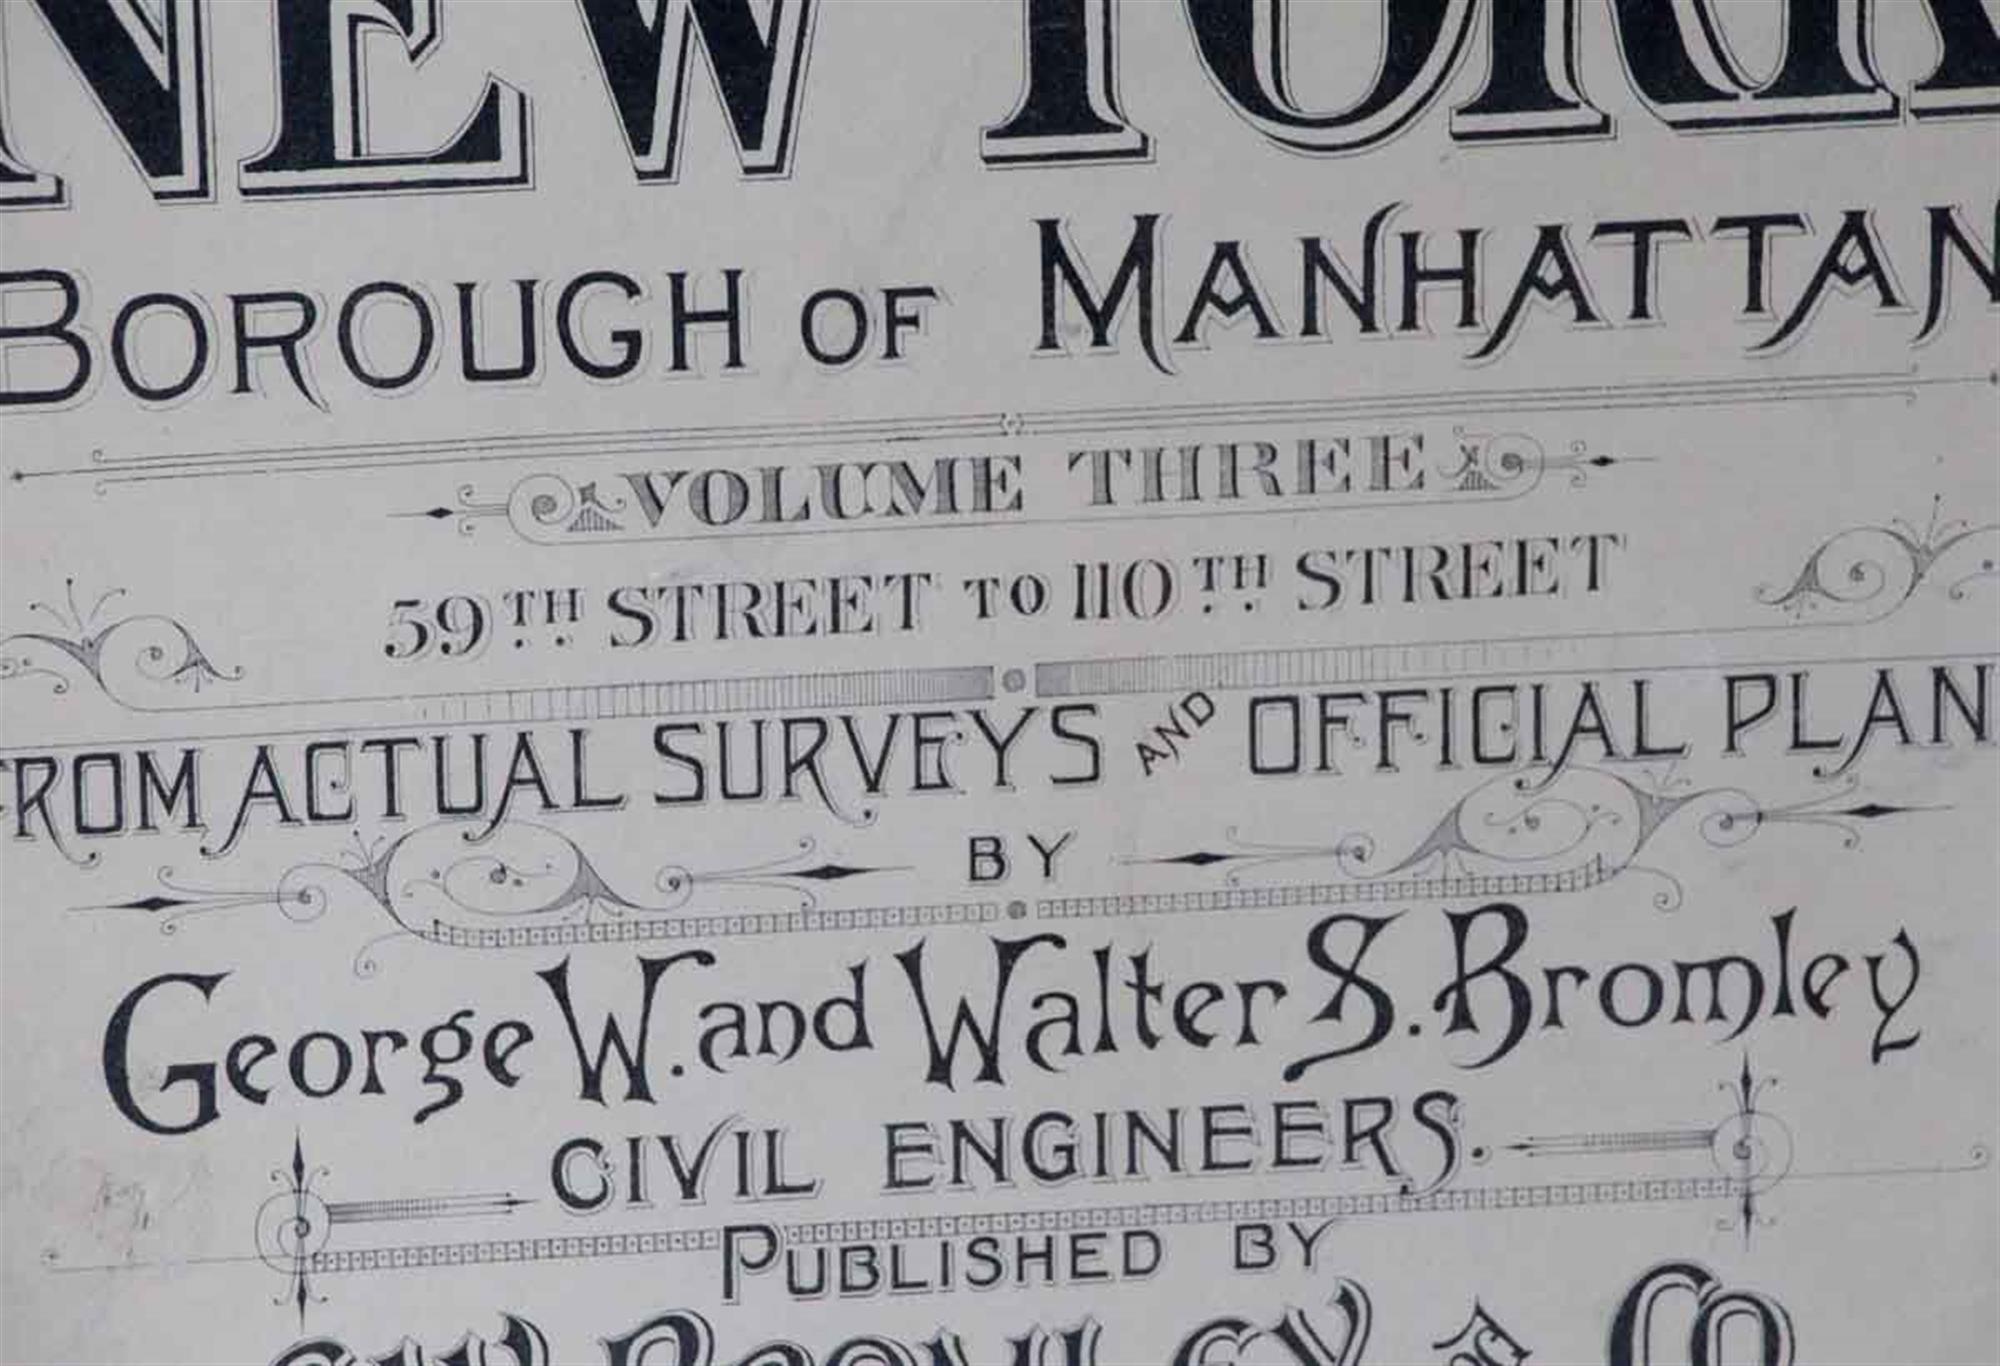 Industrial 1921 Framed Borough of Manhattan Atlas Title Page